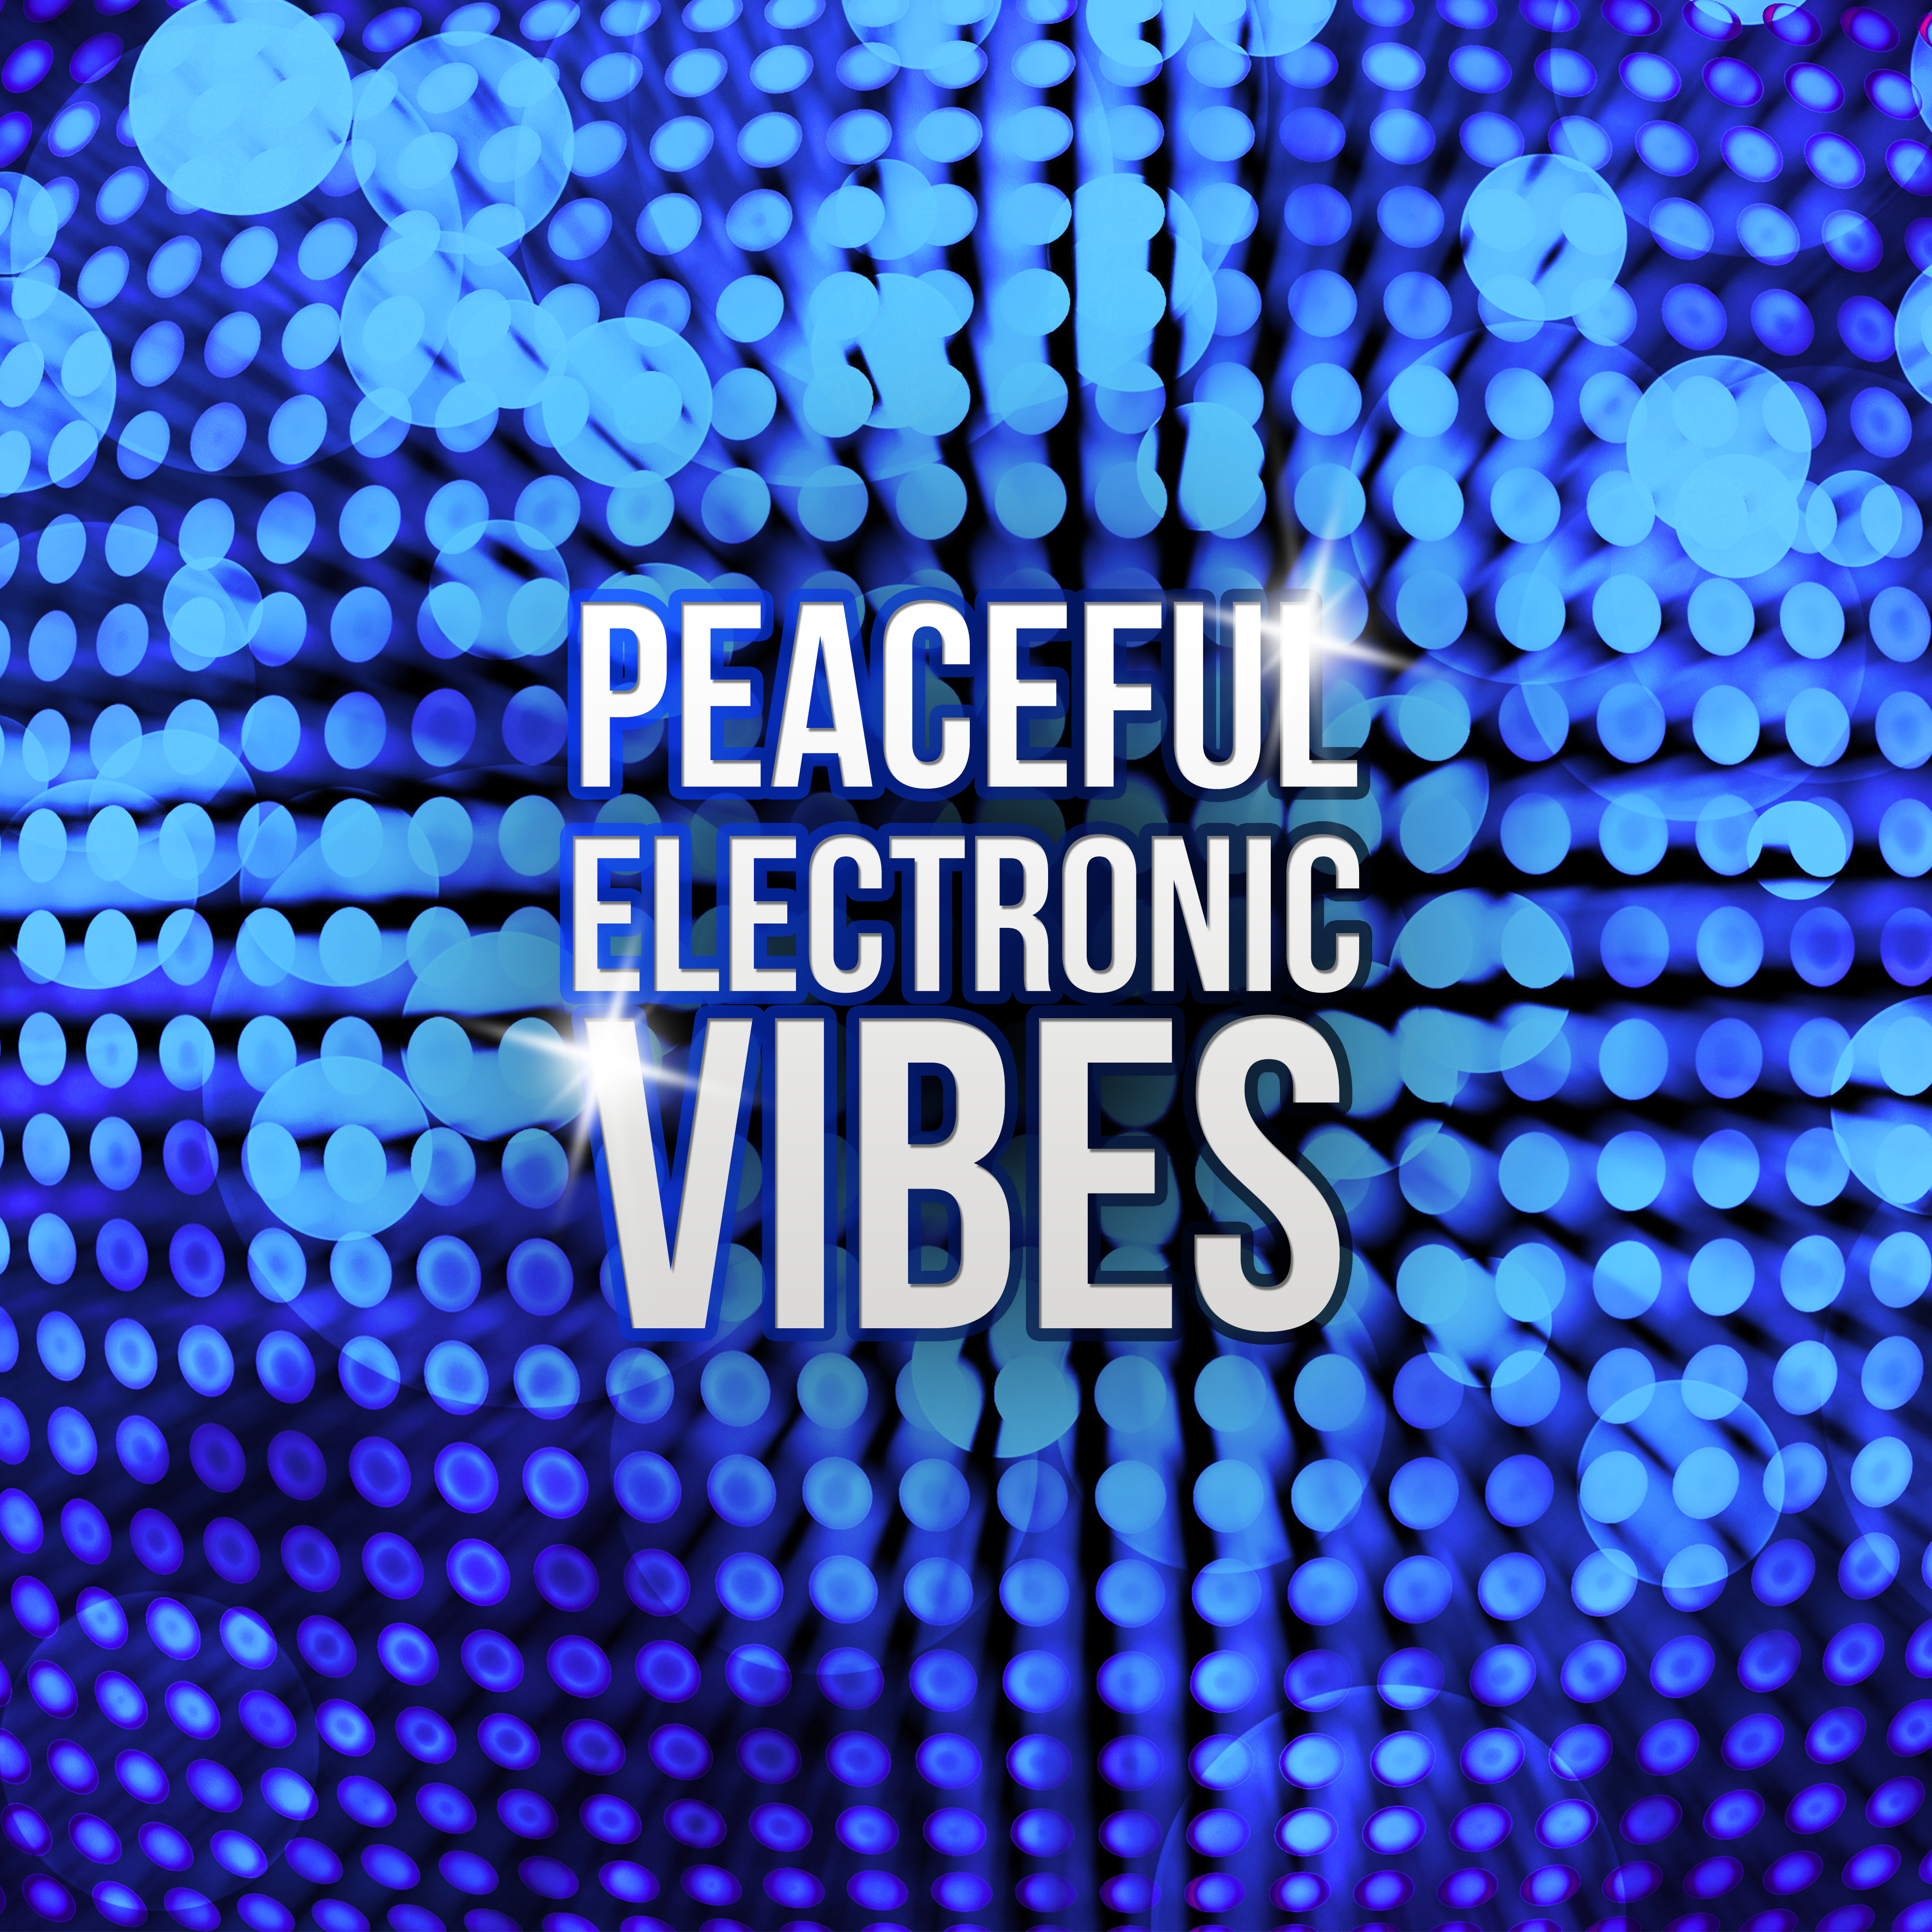 Peaceful Electronic Vibes – Summer Music, Peaceful Vibes, Chill Out 2017, Easy Listening, Beach Lounge